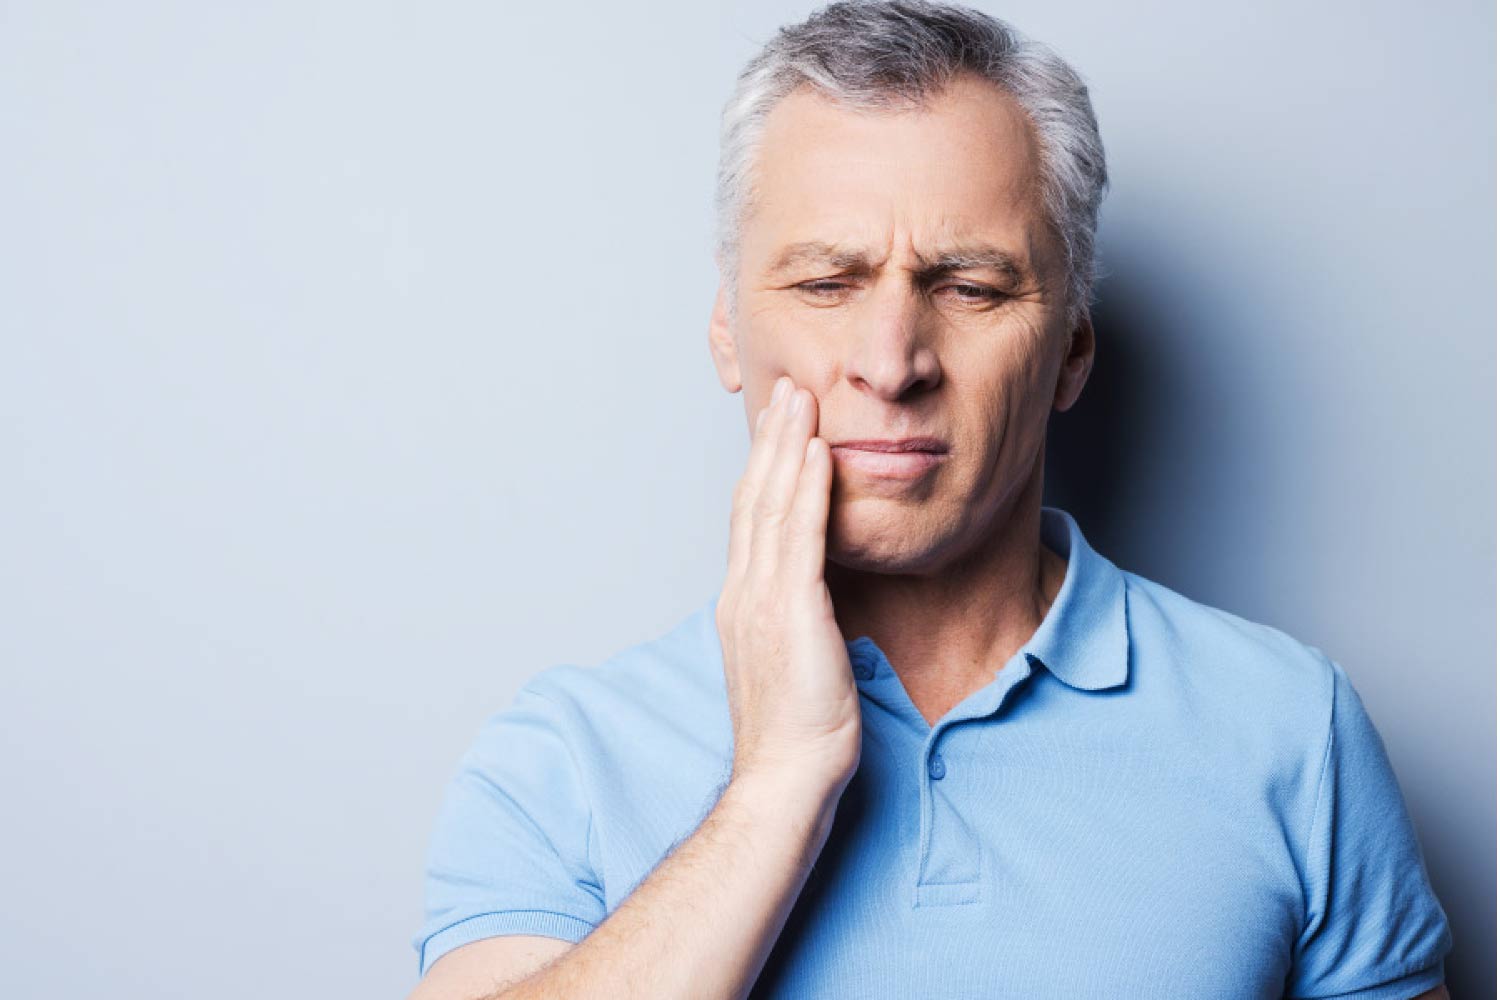 Mature man with his hand to his cheek indicating tooth pain.